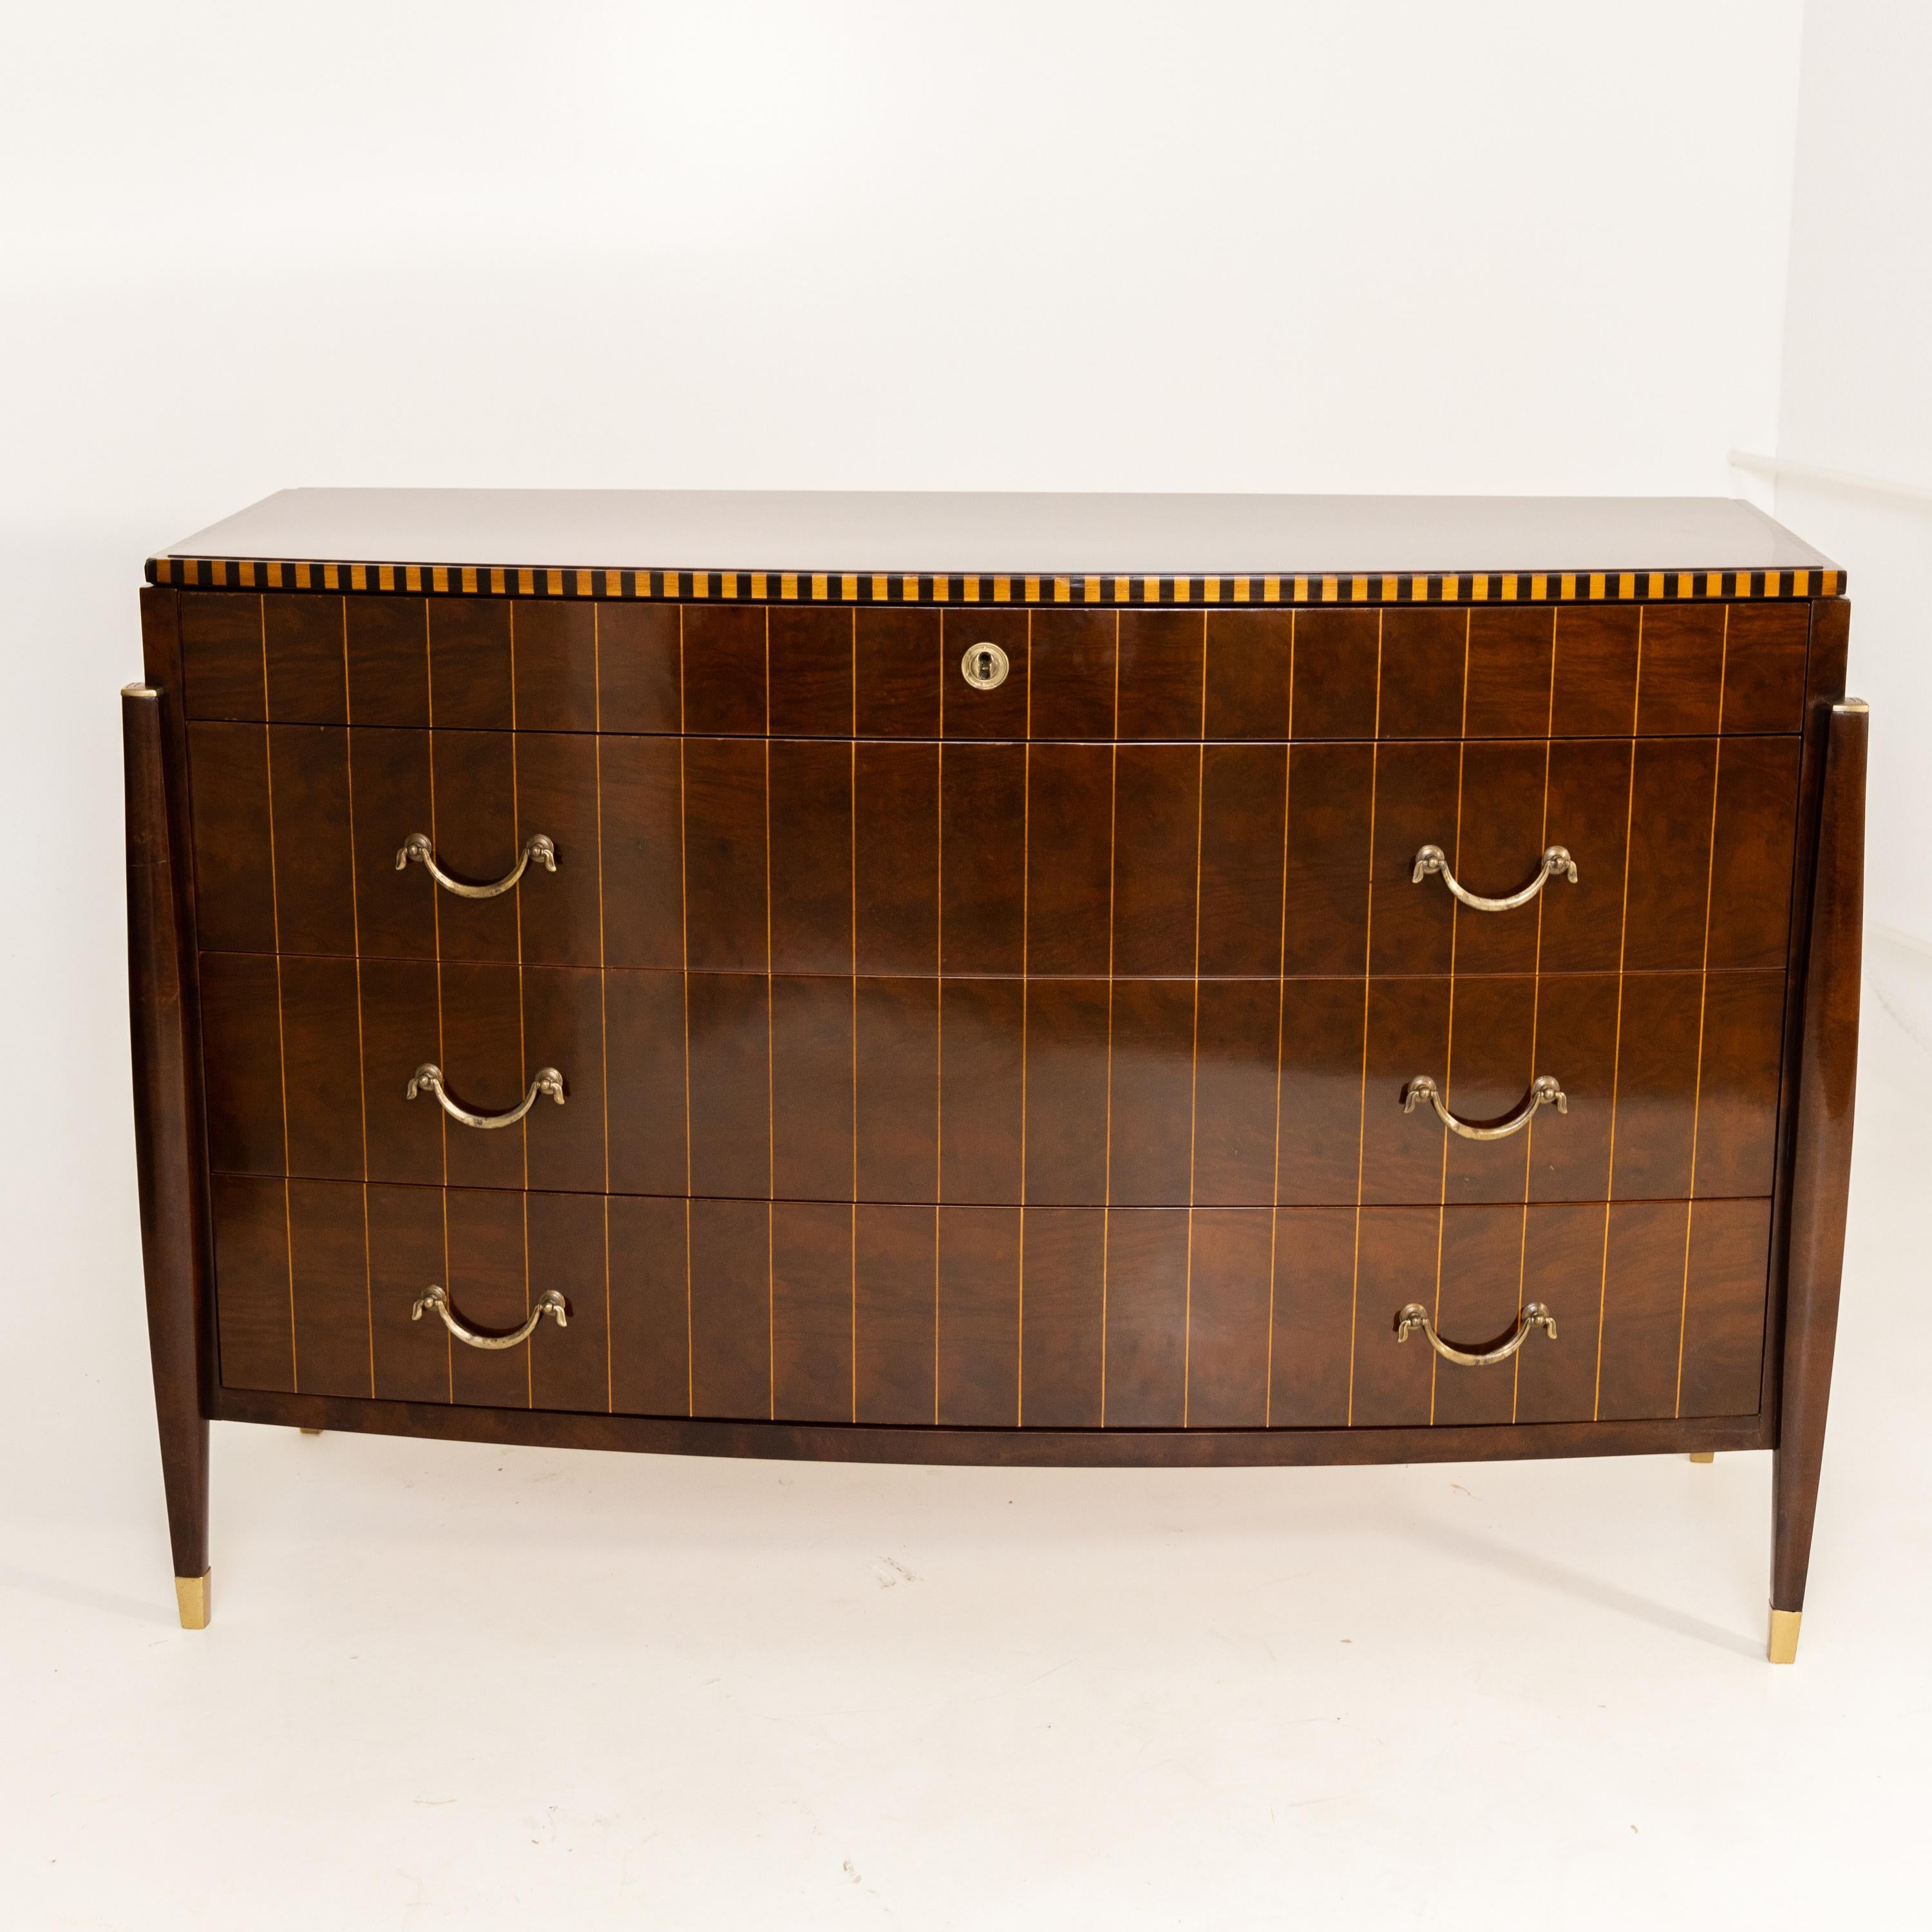 Four-drawer dresser with slightly curved front and accentuated tapered legs with brass decorations. The top panel is accented by a light-dark edge and the body is articulated by light thread inlays. The dresser has been expertly restored and hand